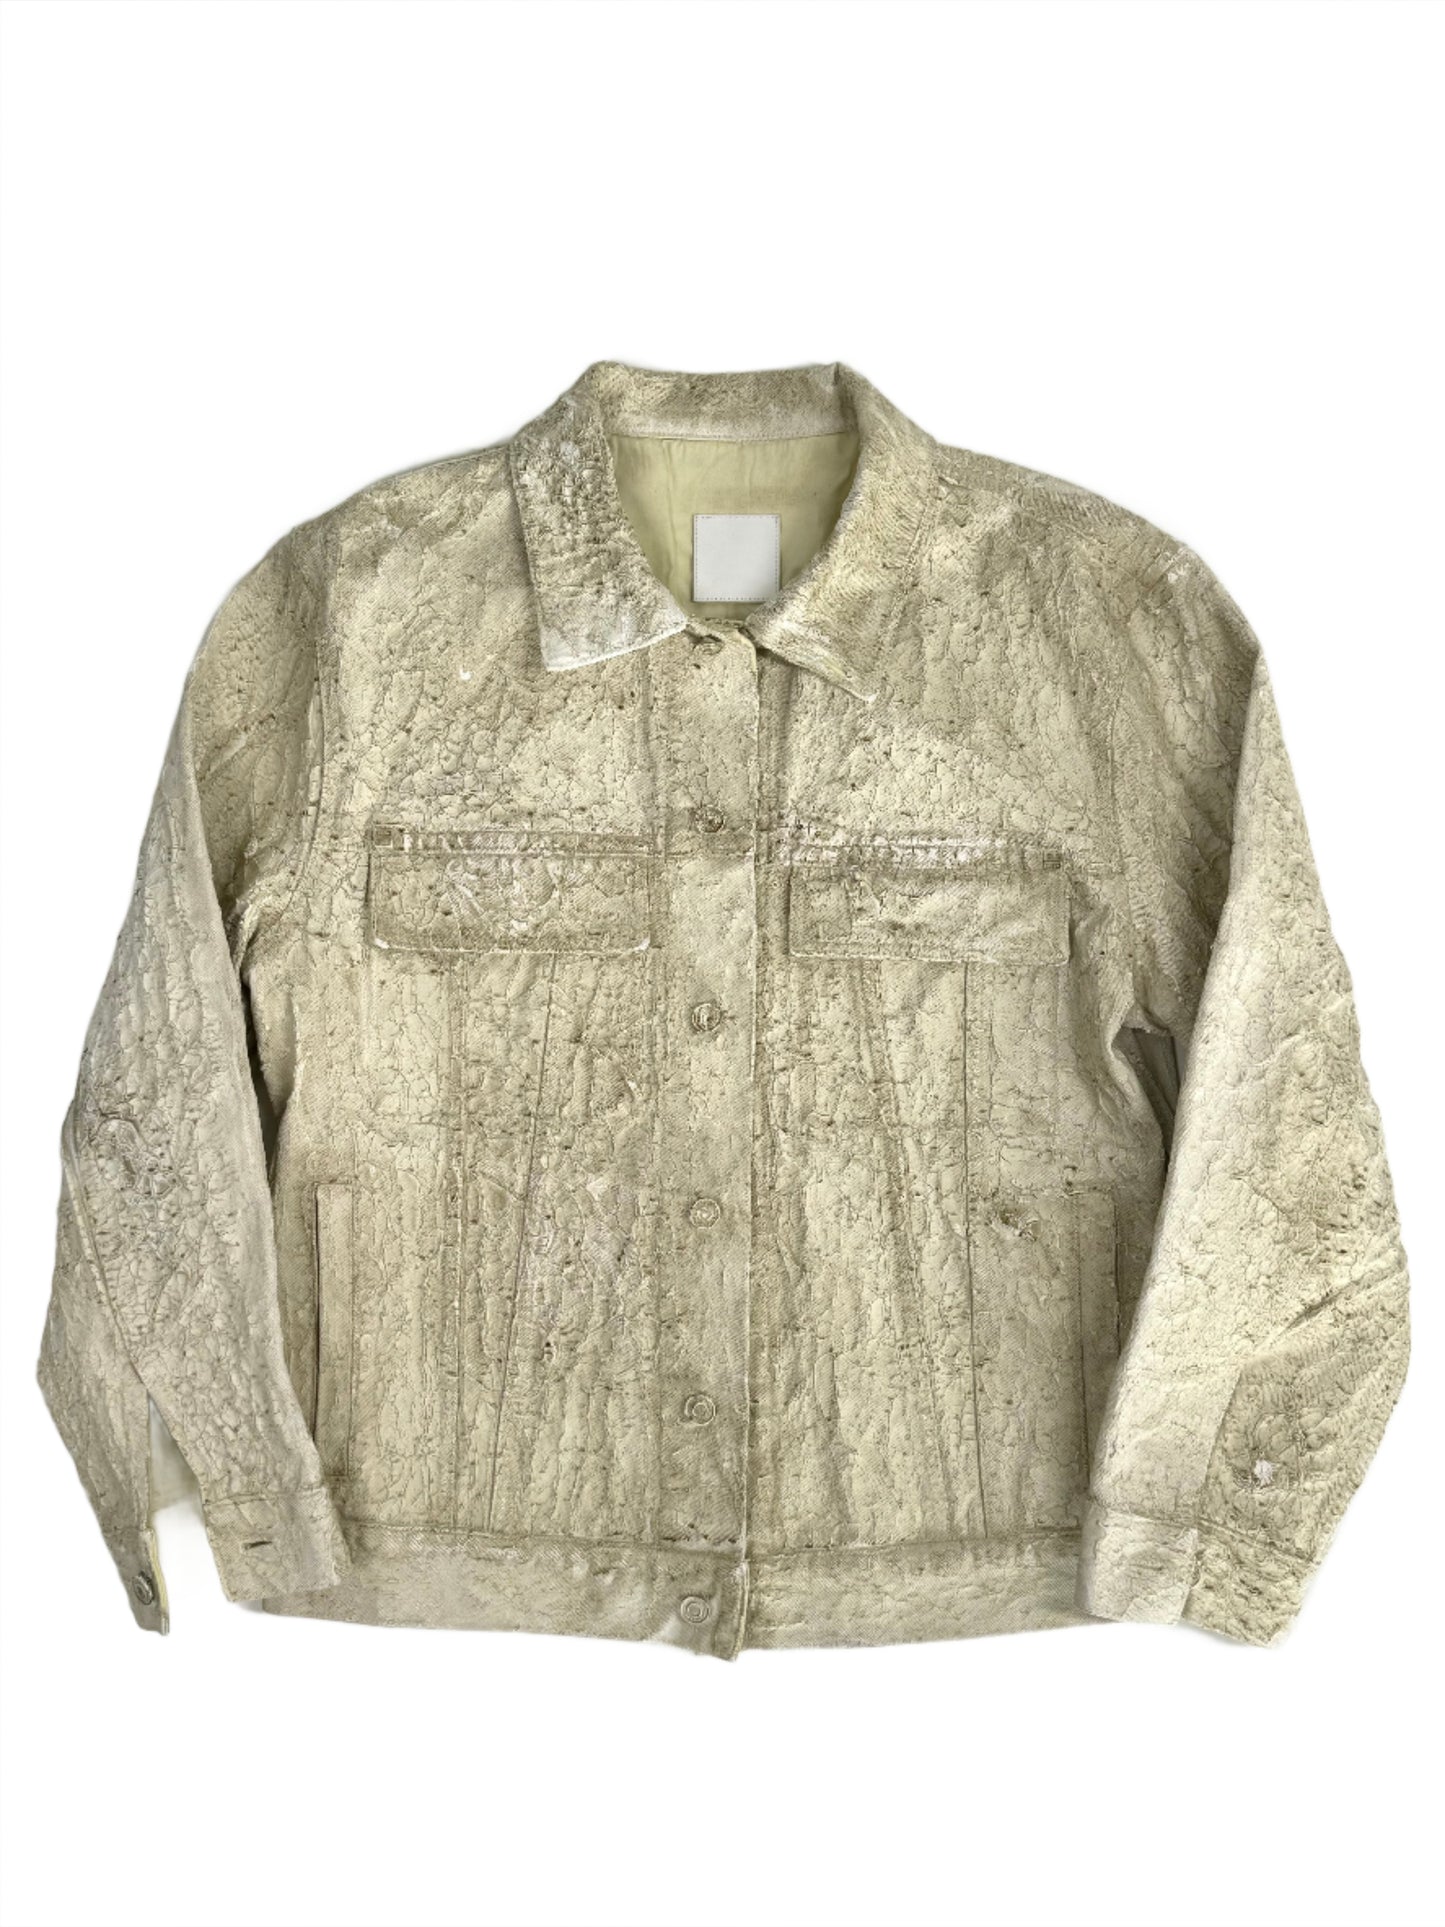 Givenchy SS21 Limited Edition Croc Painted Jacket